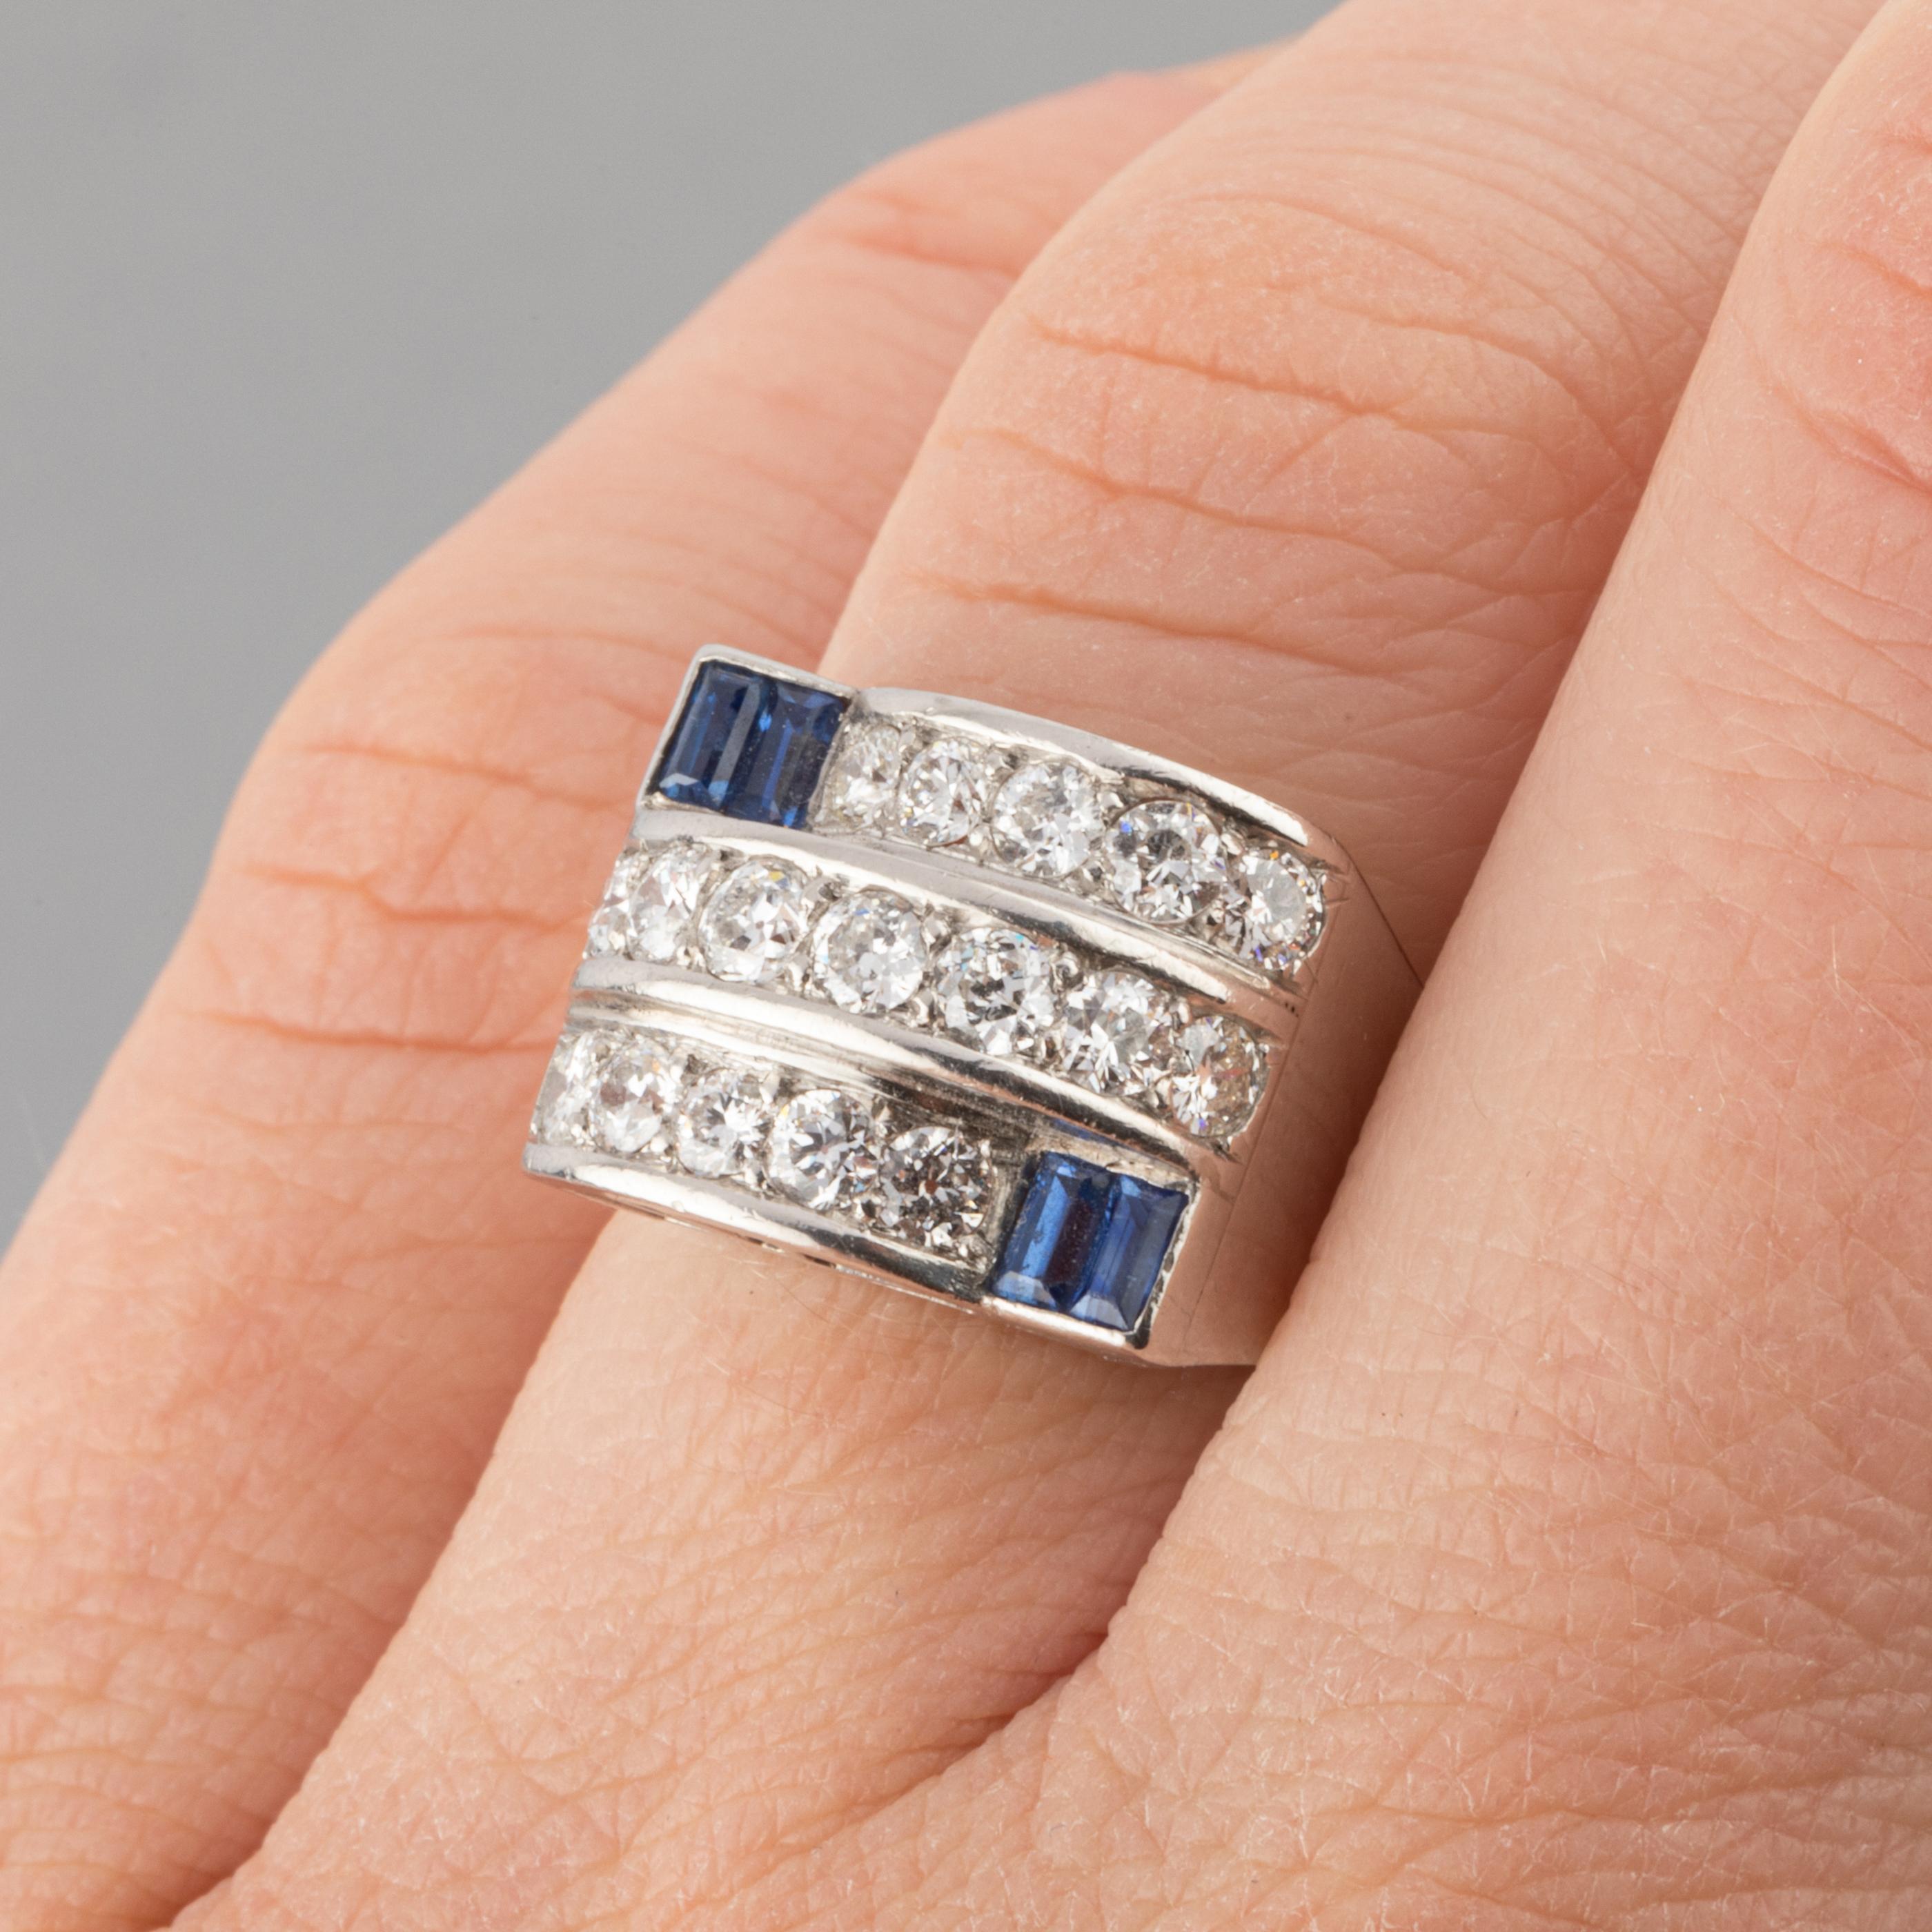 Elegant Art Deco ring, made in France circa 1930.
Made in white gold and set with diamonds and sapphires.
The diamonds weights 1.50 carats, they are white, good quality.
Ring size is 51.5 or 6 usa, sizeable.
The dimensions of stones part is 15 mm *